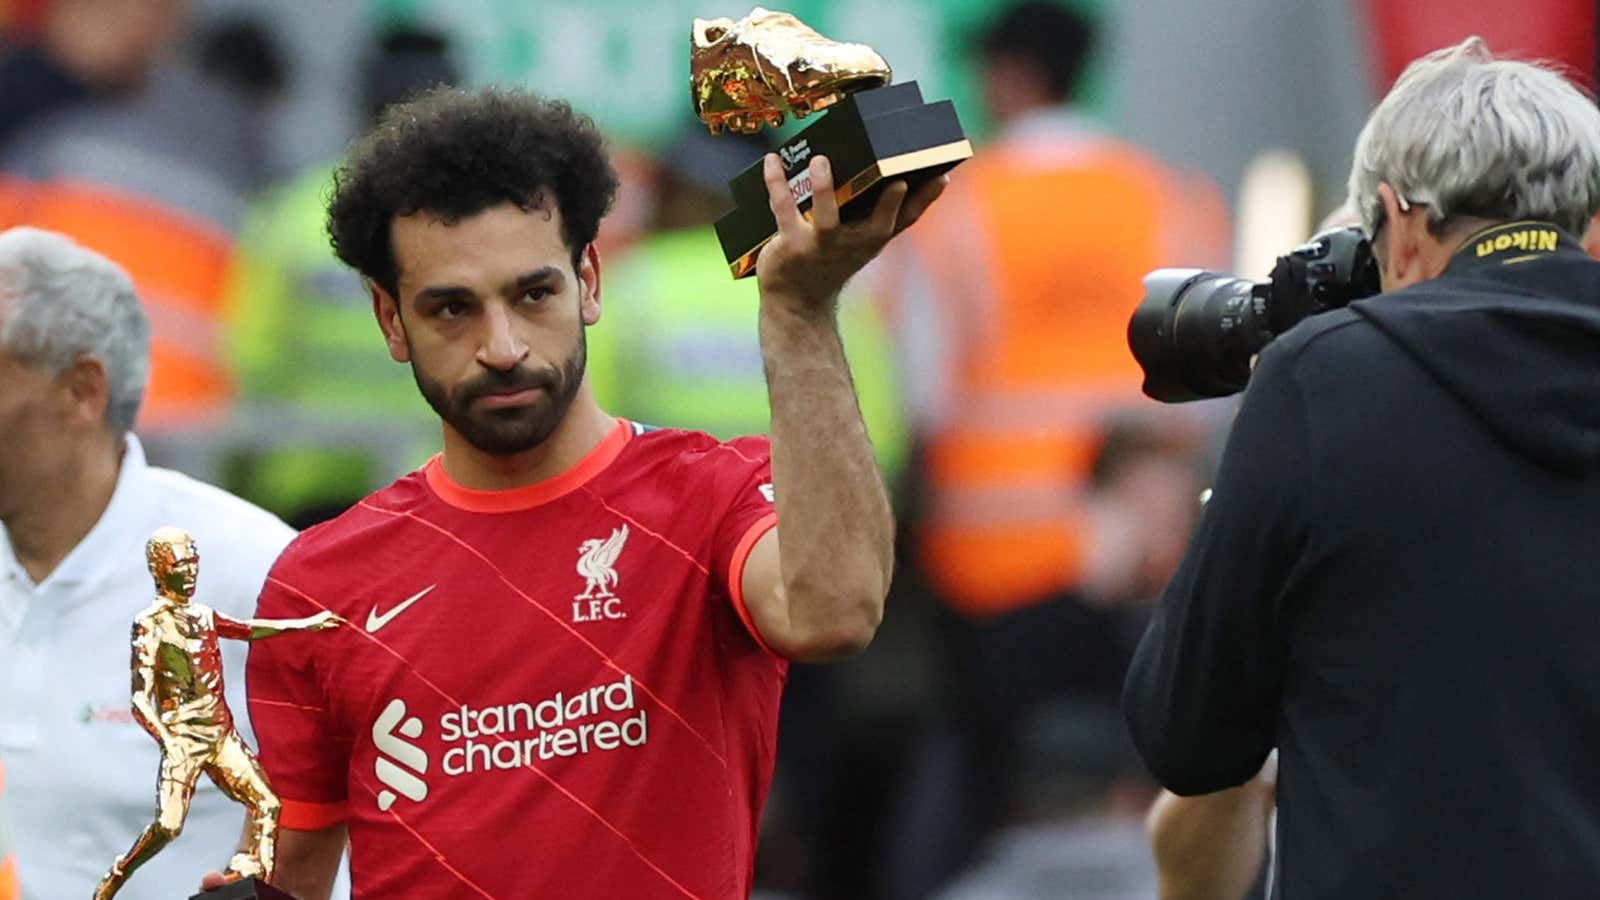 Mo Salah needs one more of that shoe to own two pairs